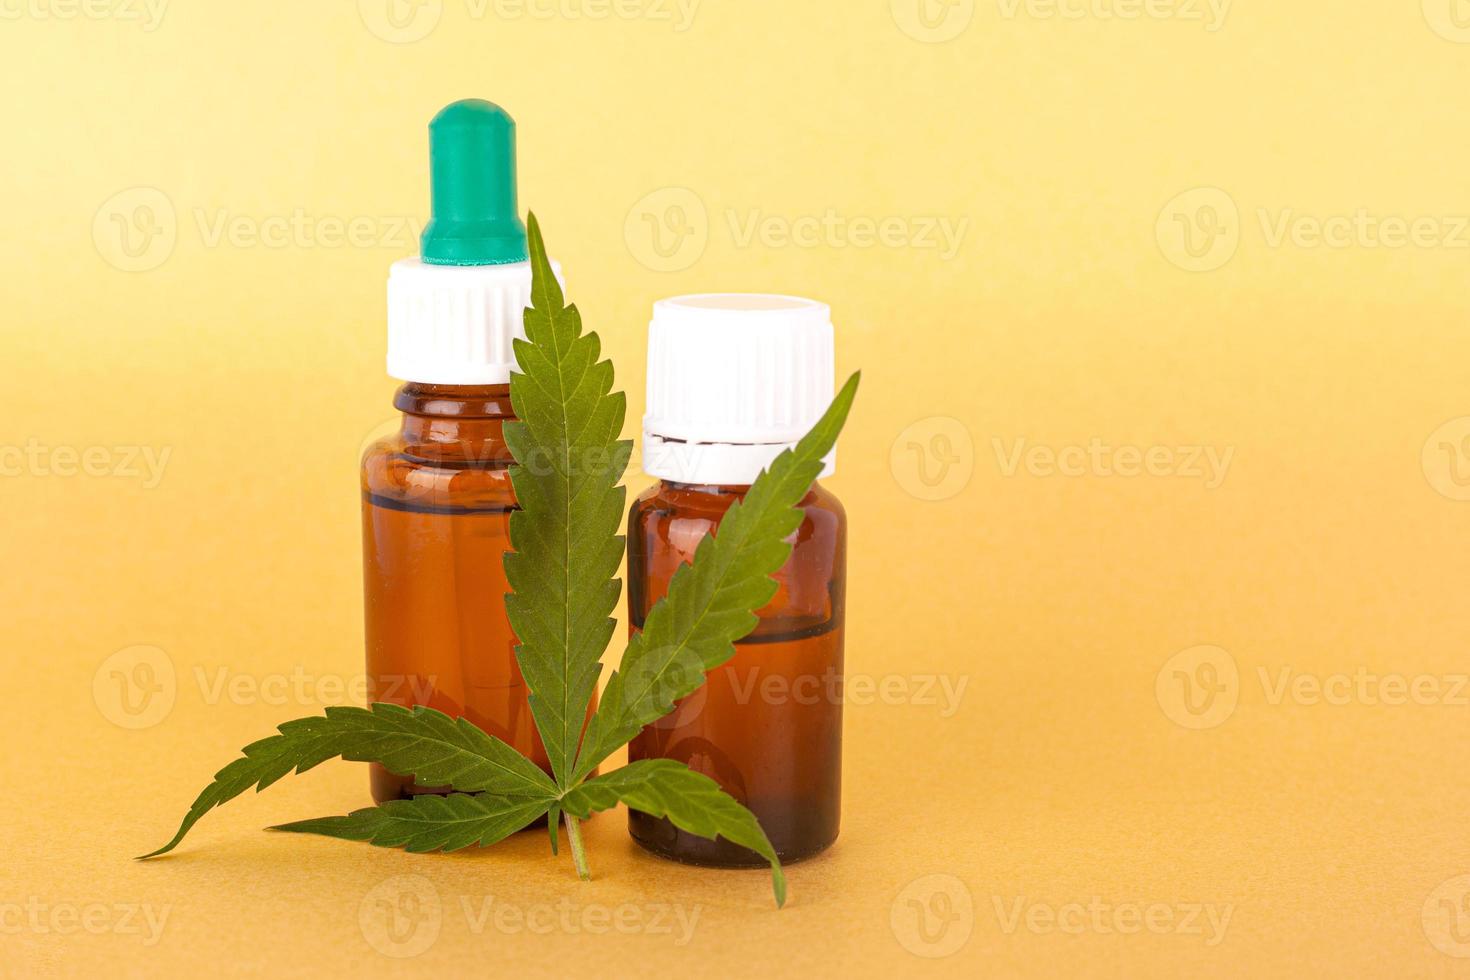 Thc and cbd extract medical cannabis oil, herbal elixir photo